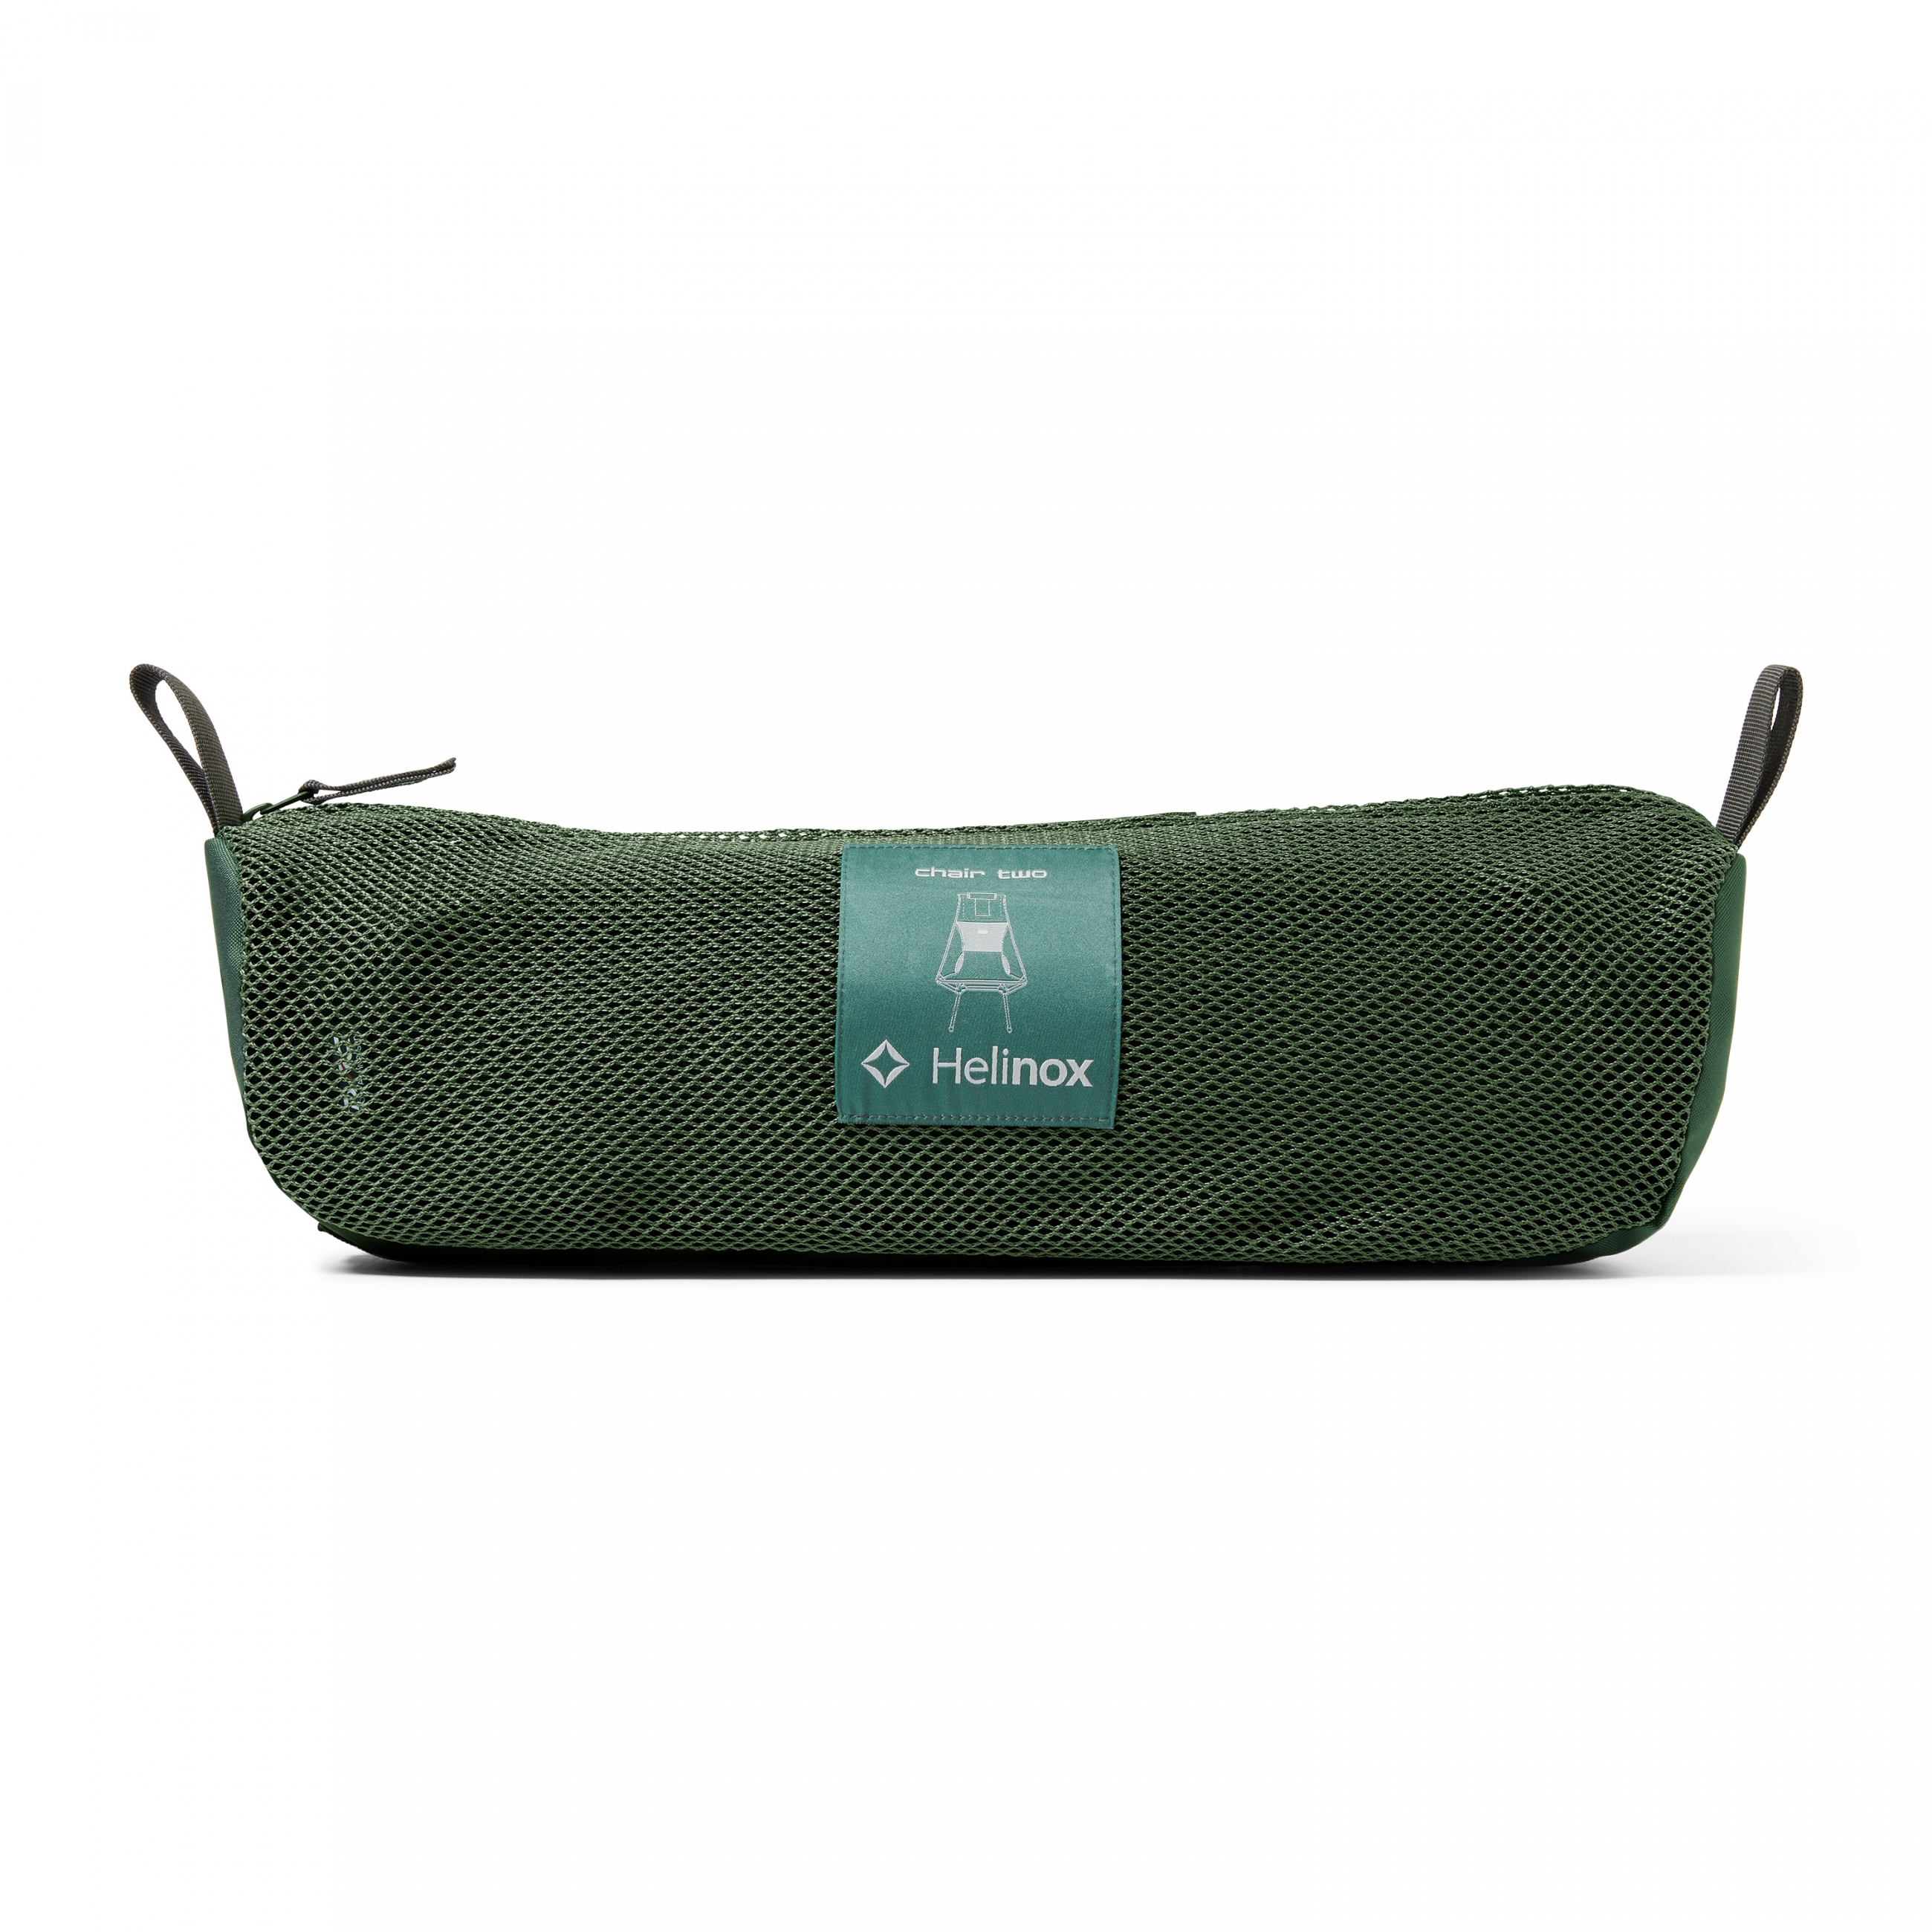 Helinox_191001R1_Chair-Two_Forest-Green_Bag